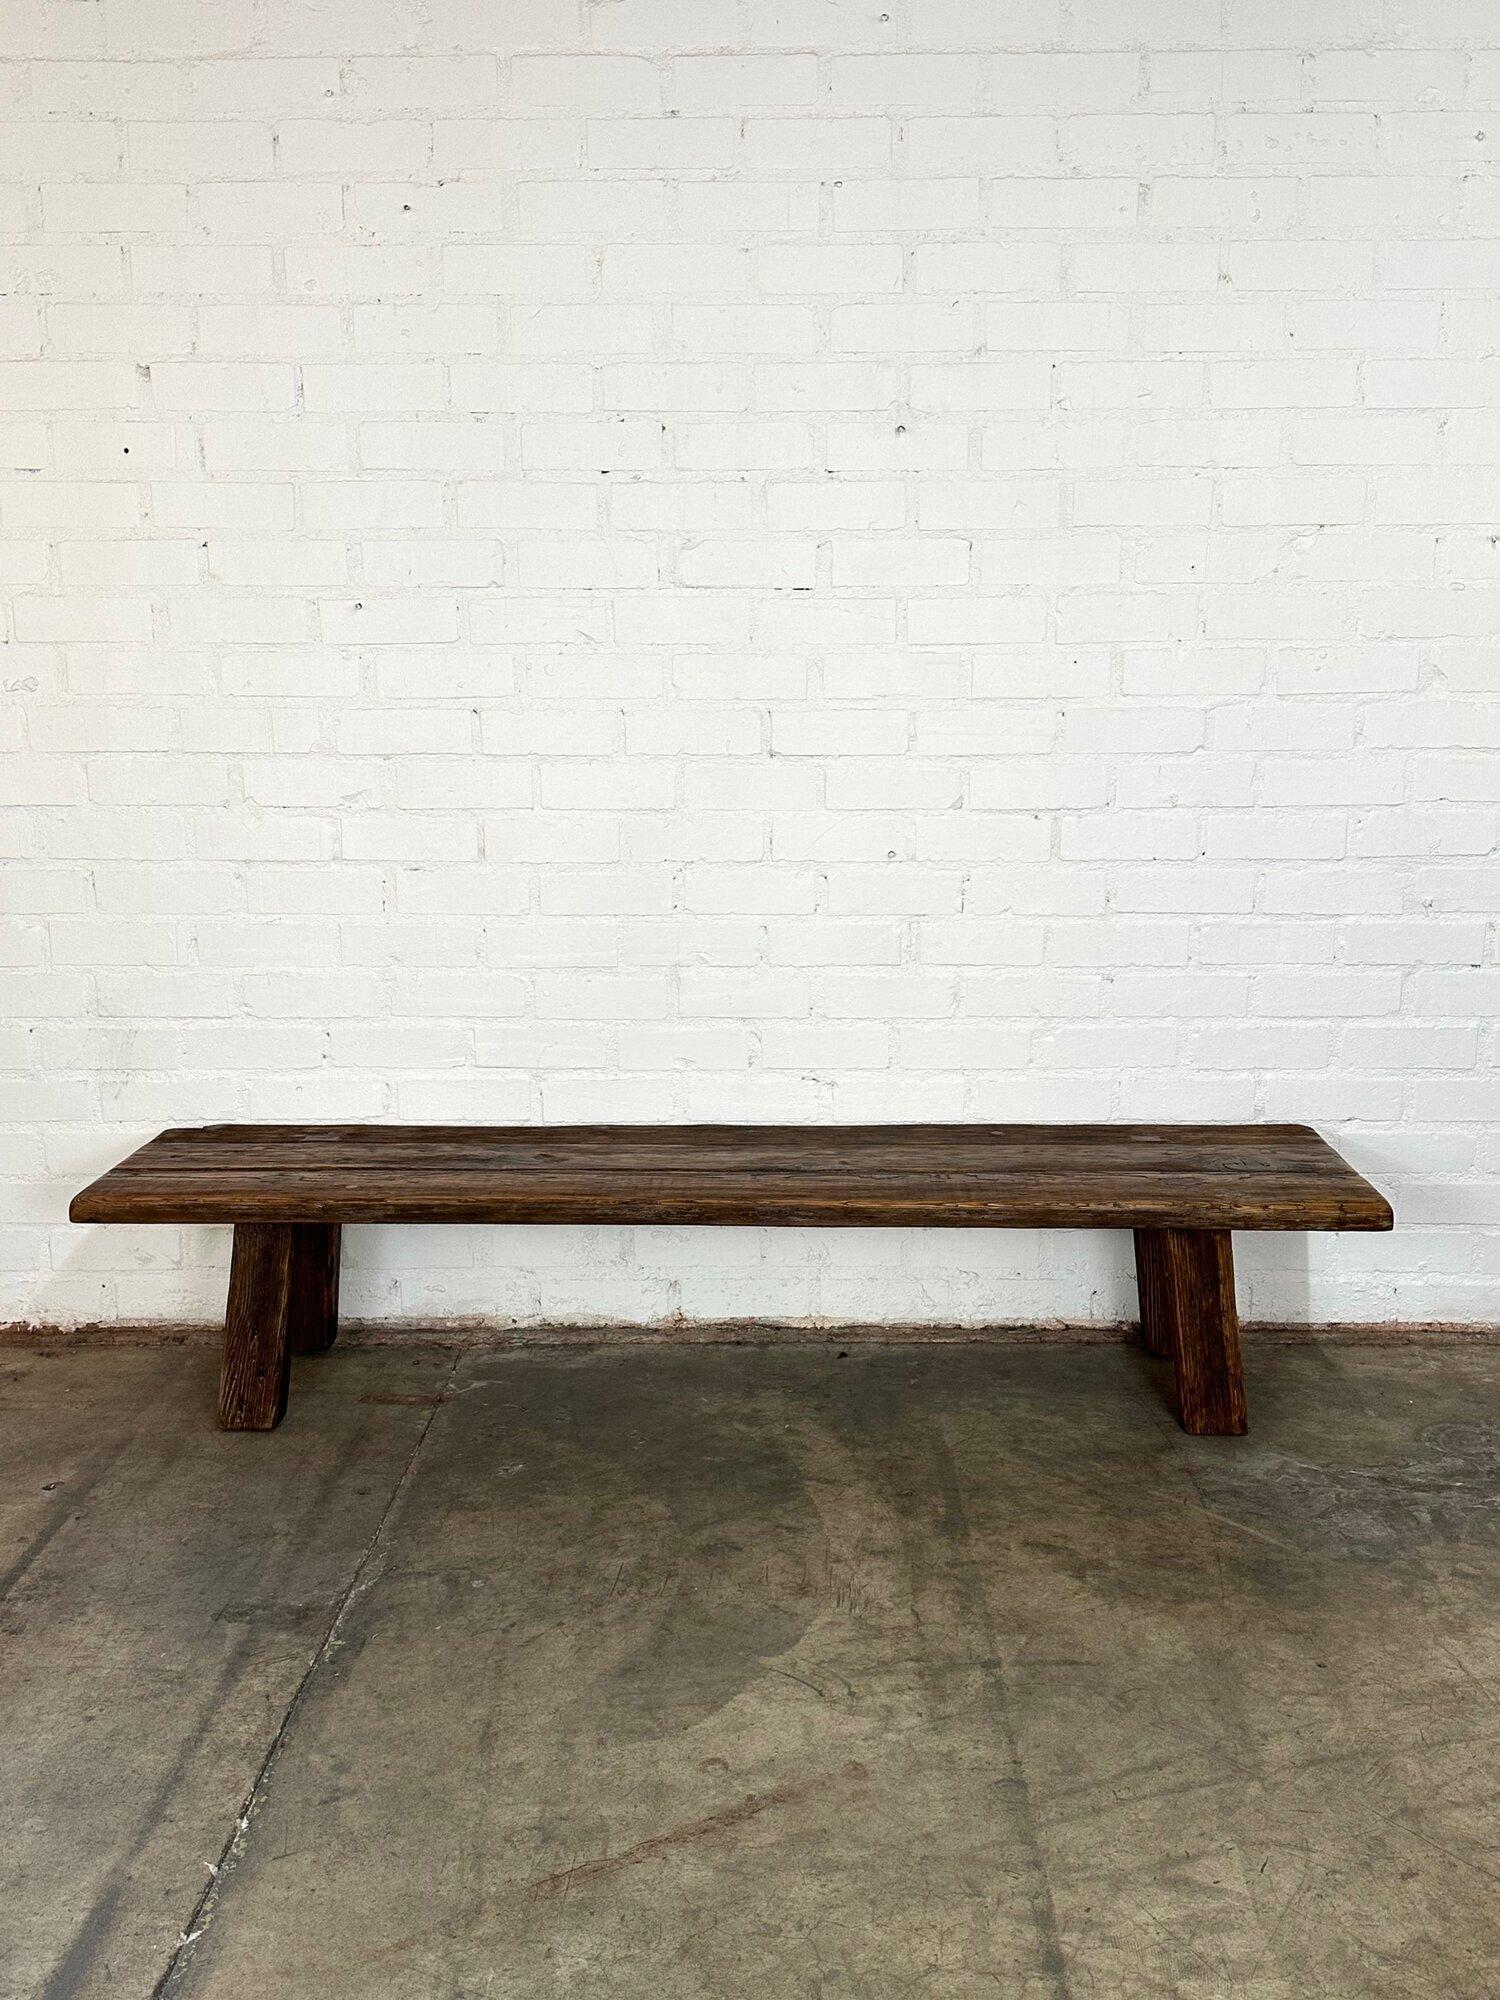 Rustic Low profile primitive bench or coffee table For Sale